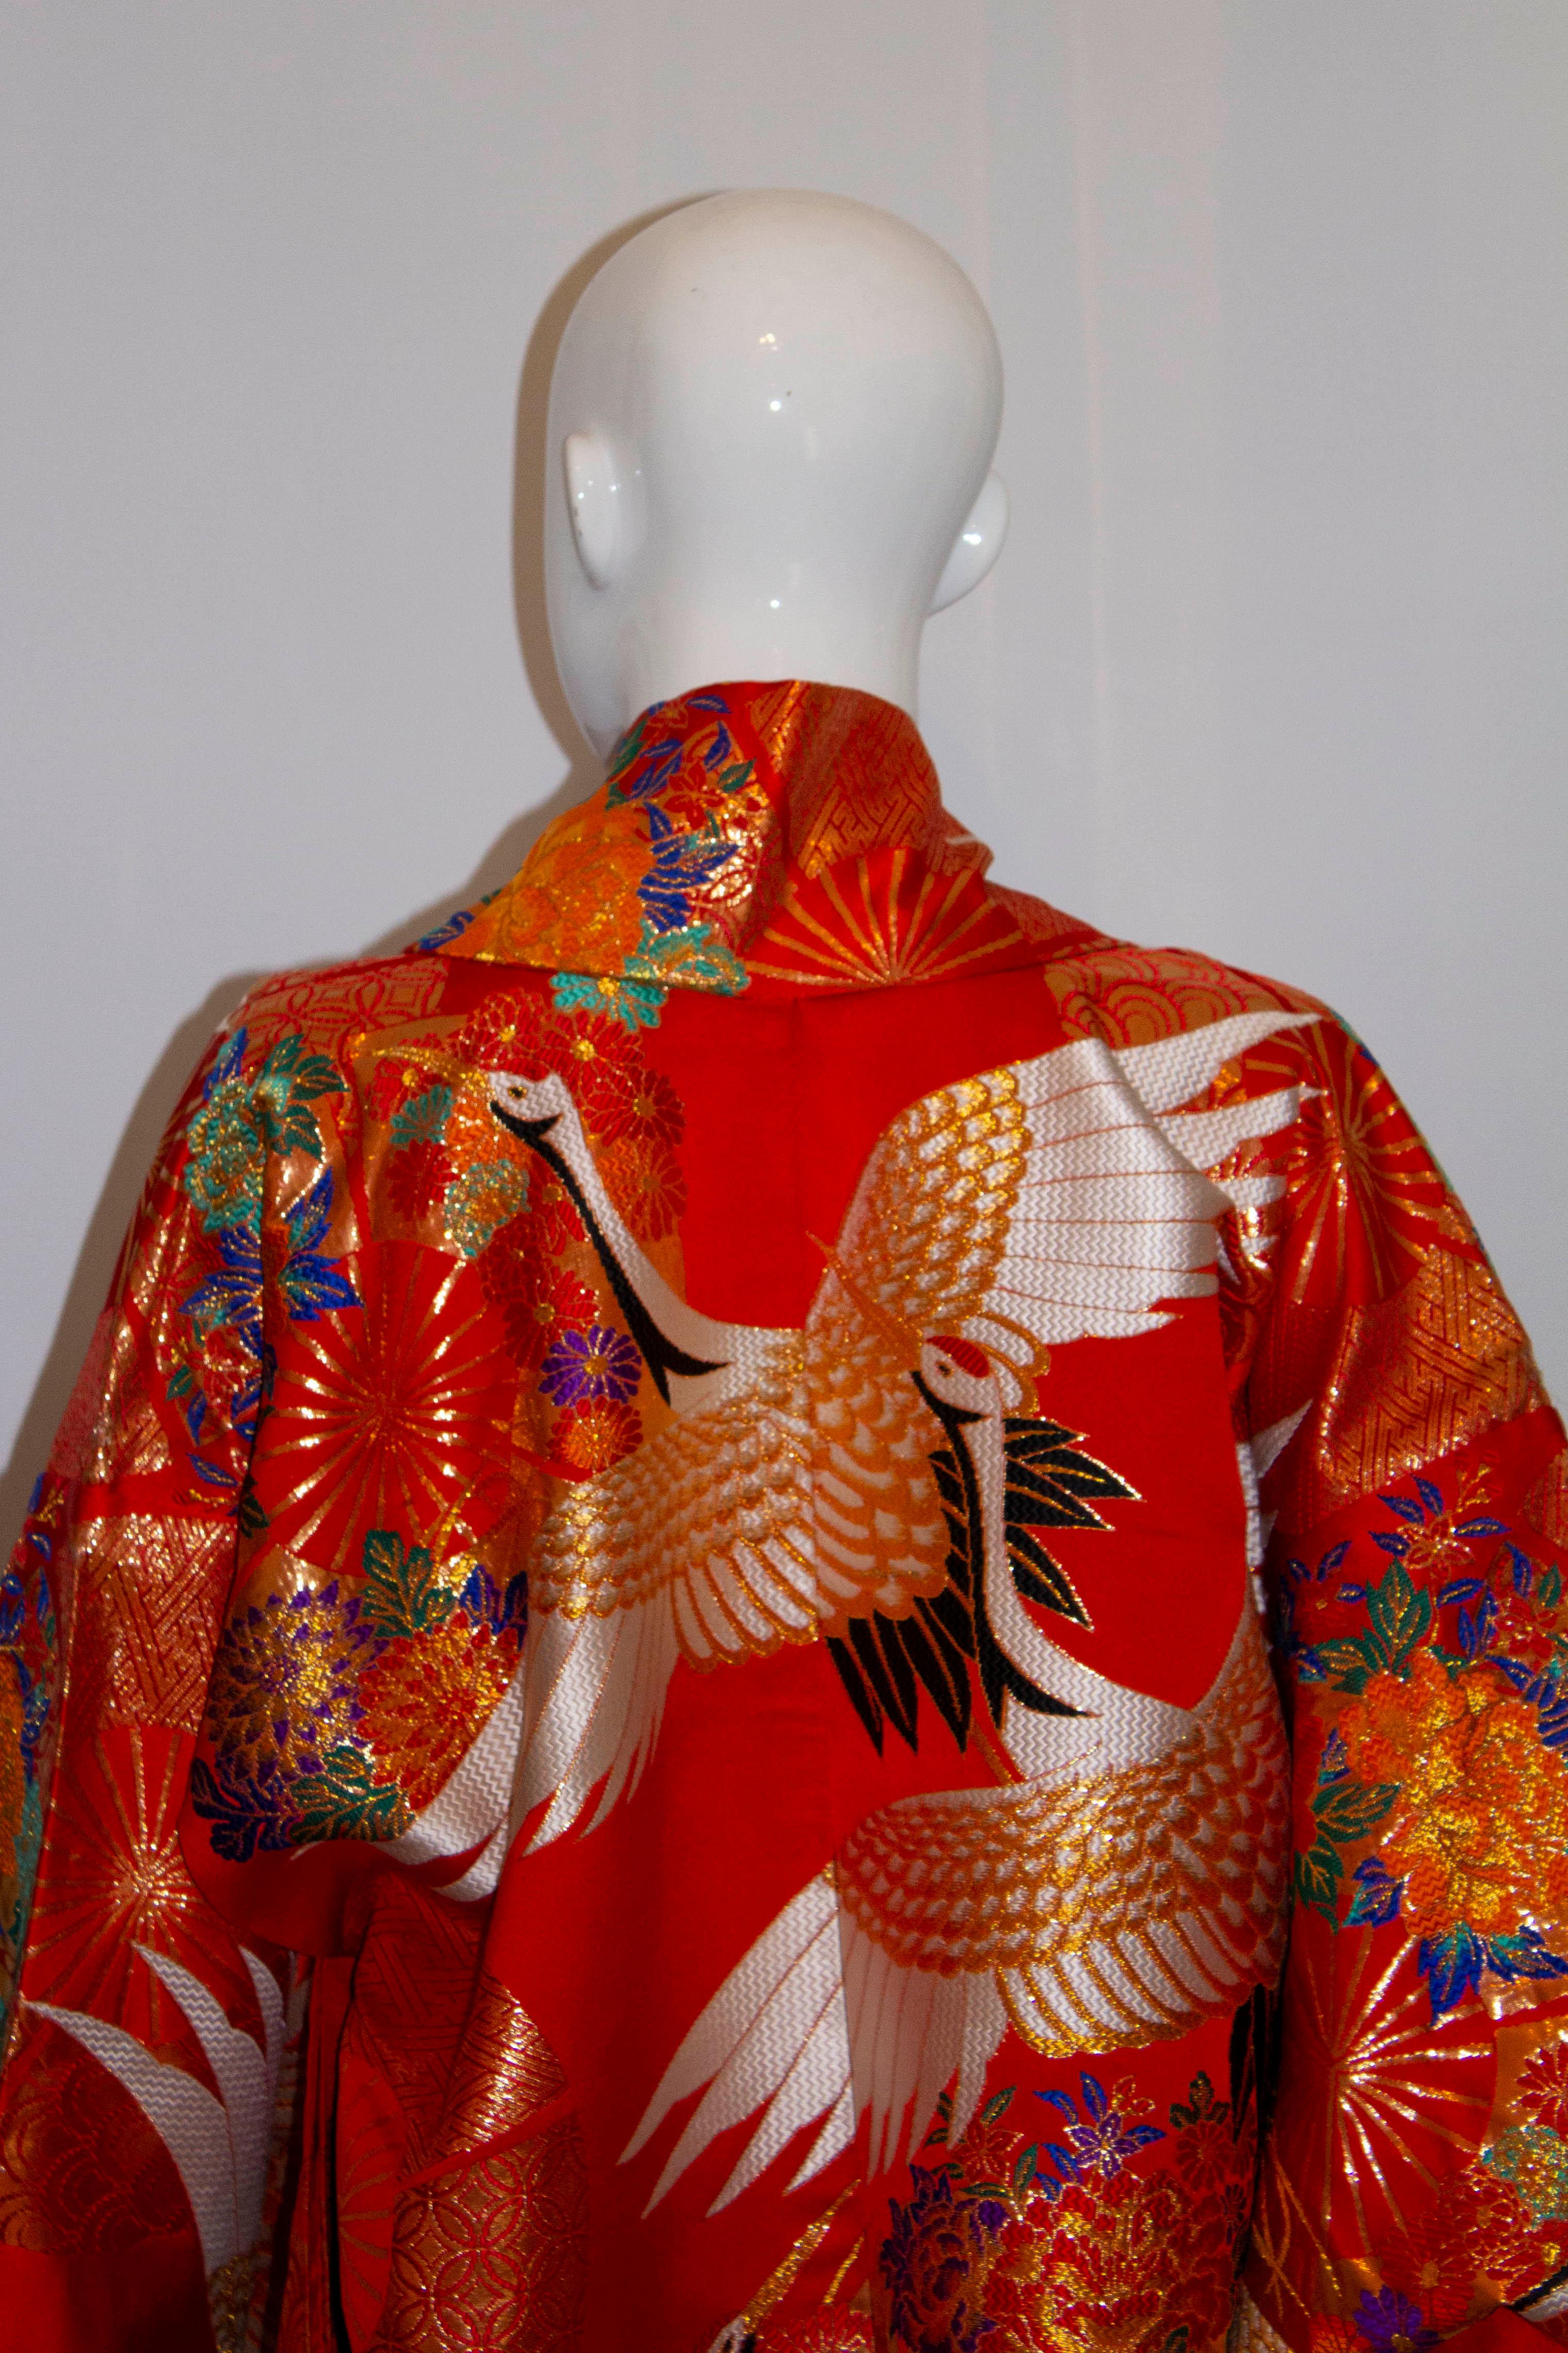 A stunning vintage wedding kimono, in a wonderful scarlet colour , heavily embroidered with white and gold cranes flying through clouds. Cranes mate for life and are a fortuitous symbol representing harmony in a relationship and longevity. The hem